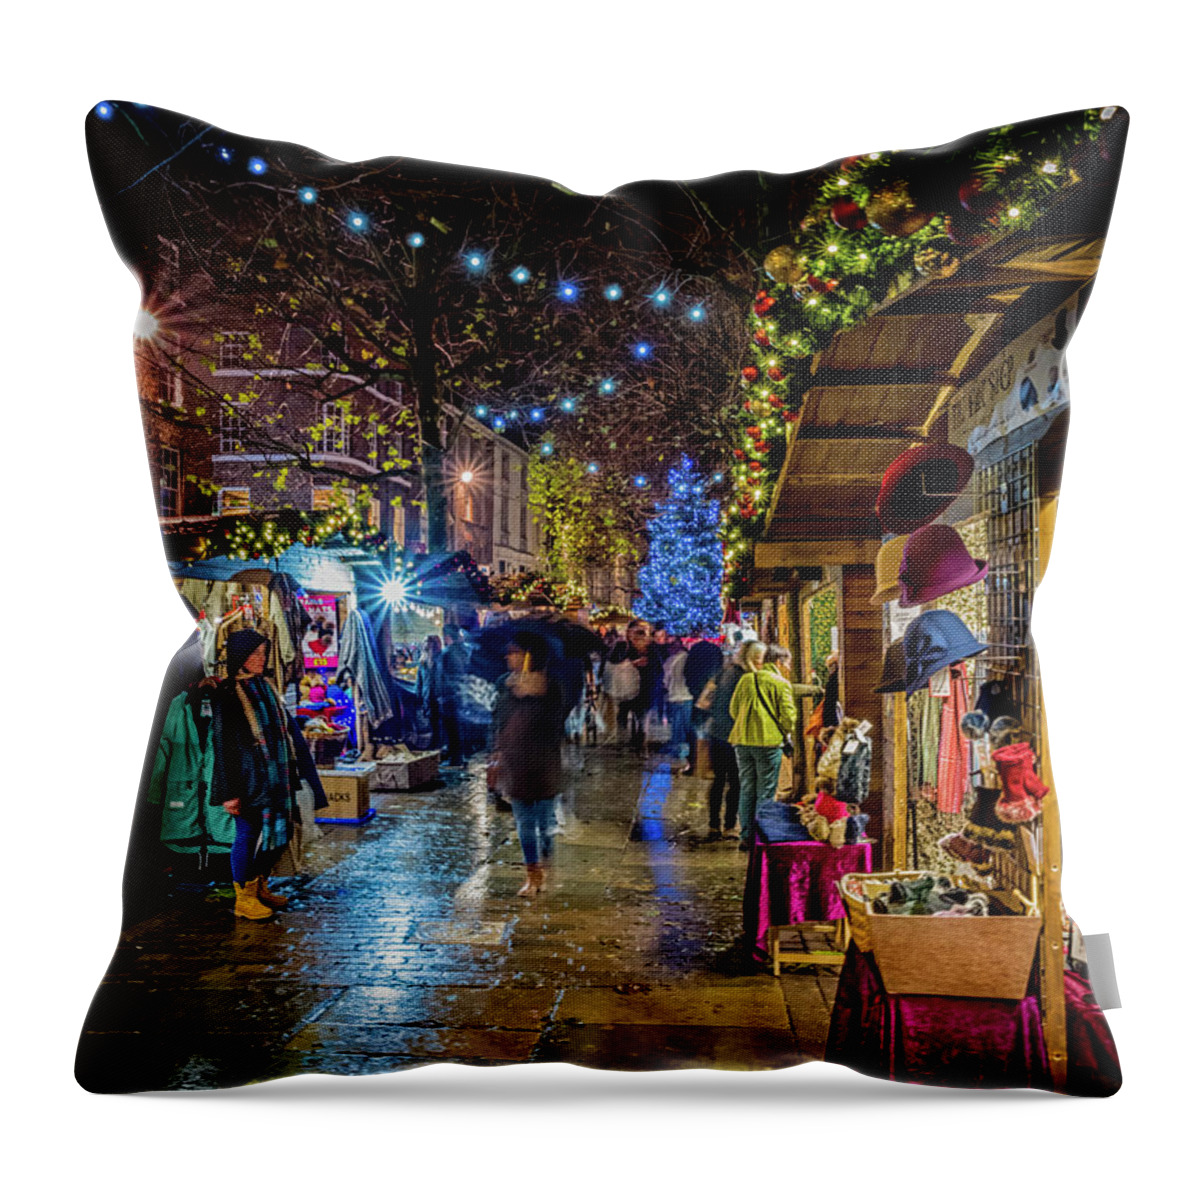 Xmas Throw Pillow featuring the photograph Christmas Market by Nick Bywater